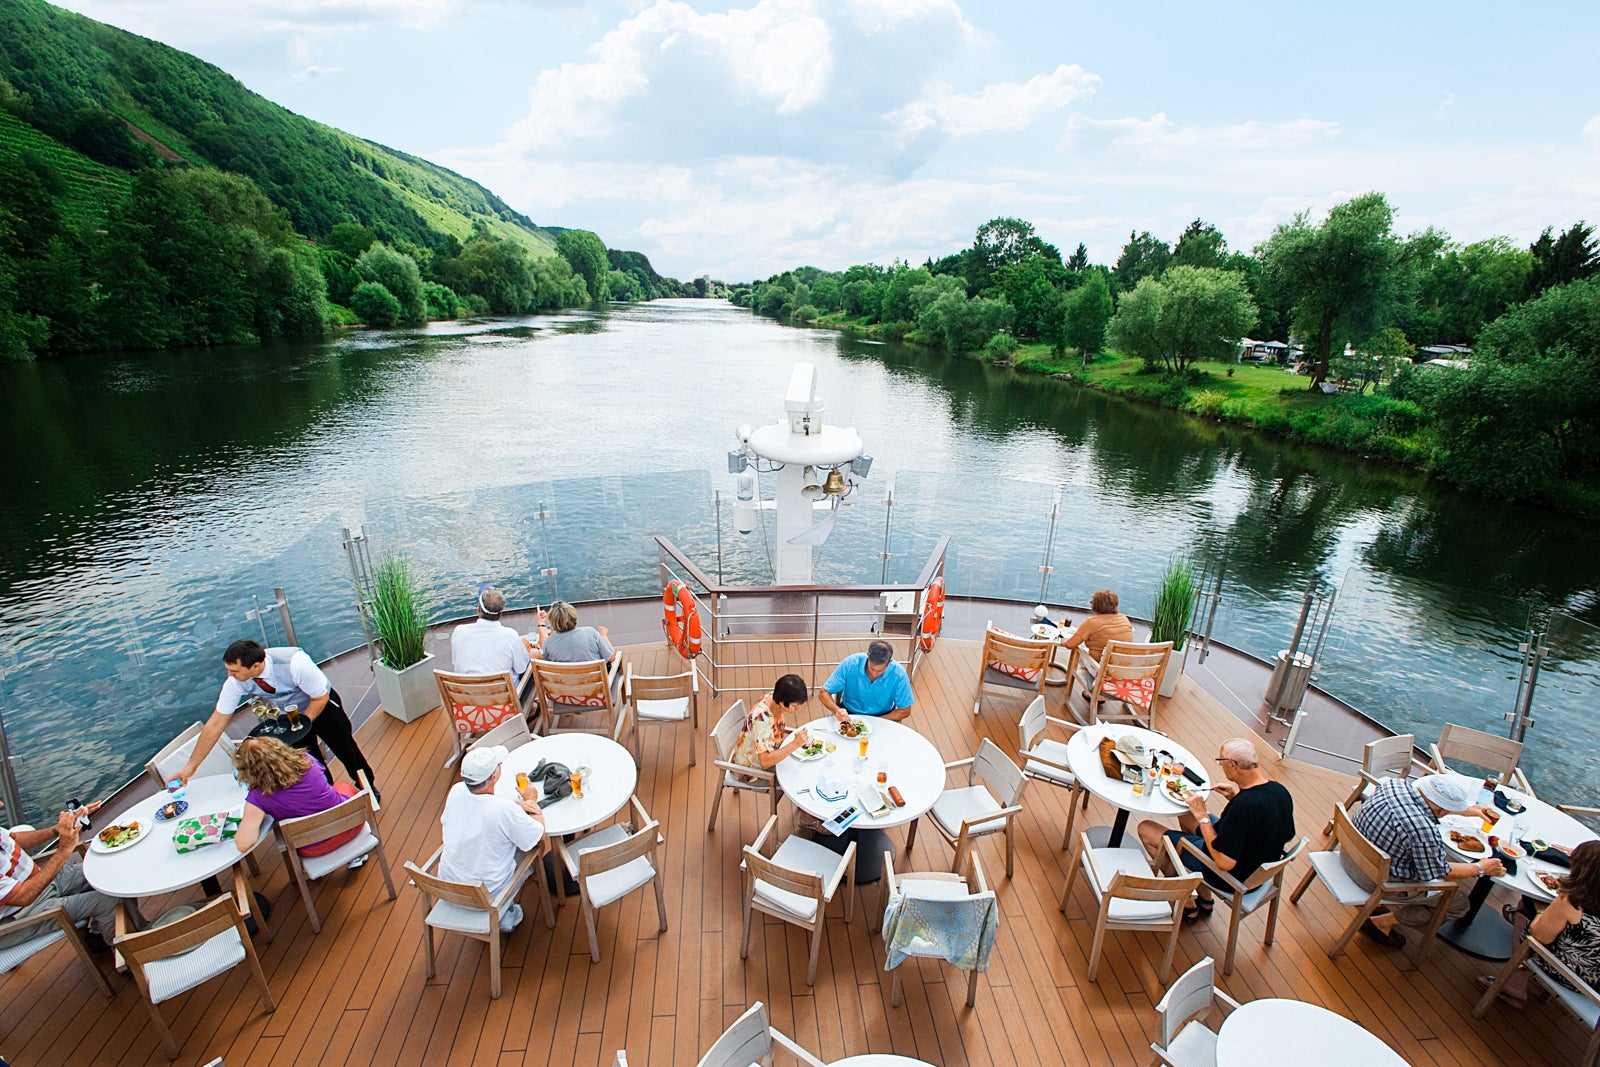 River cruise passengers dine on boat's top deck